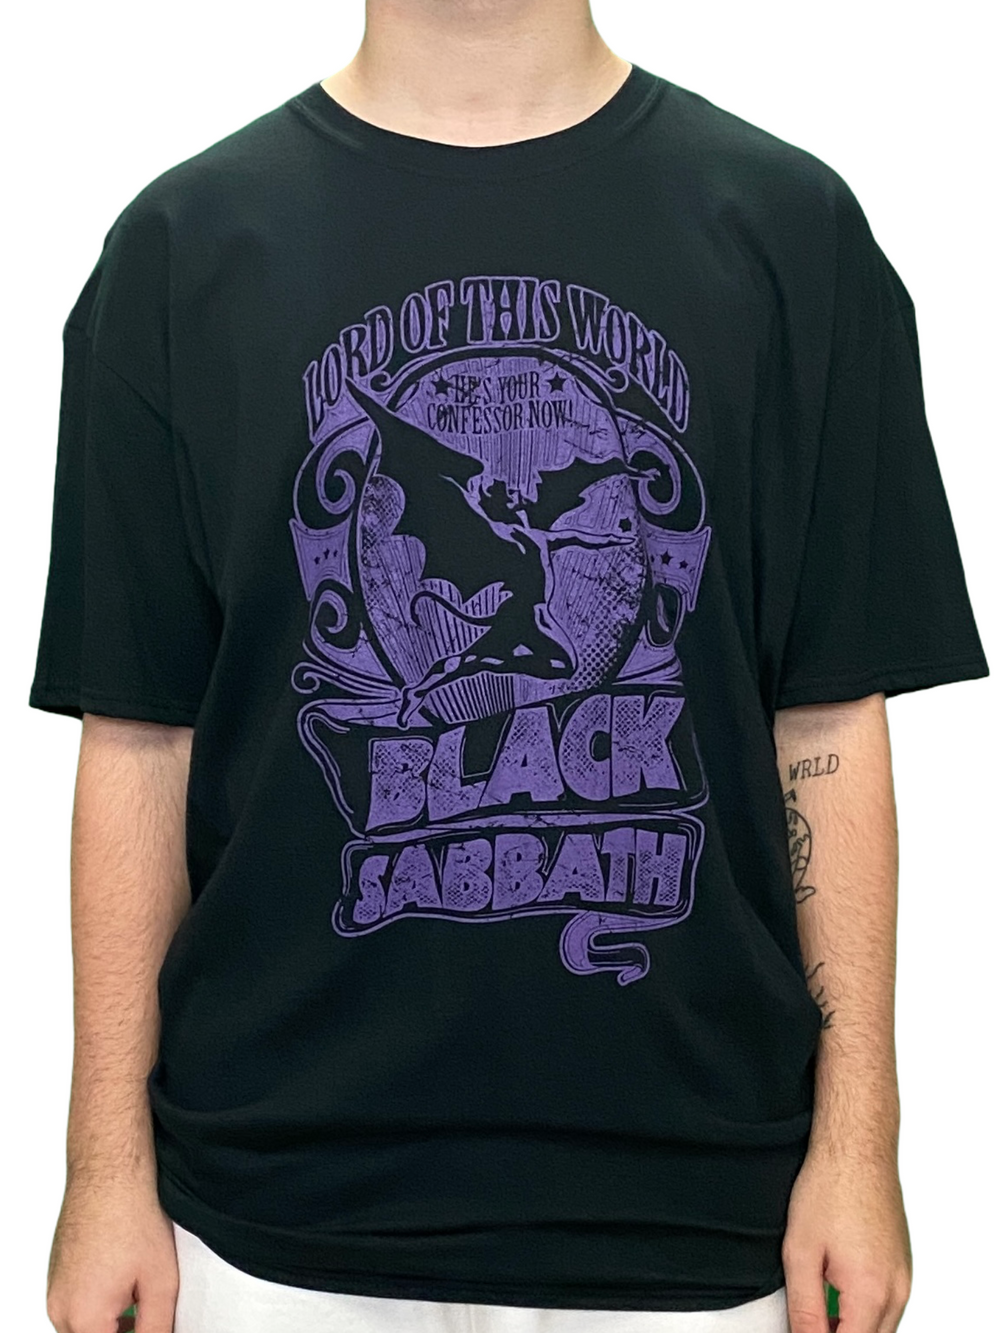 Black Sabbath Lord Of This World Unisex Official T Shirt Brand New Various Sizes